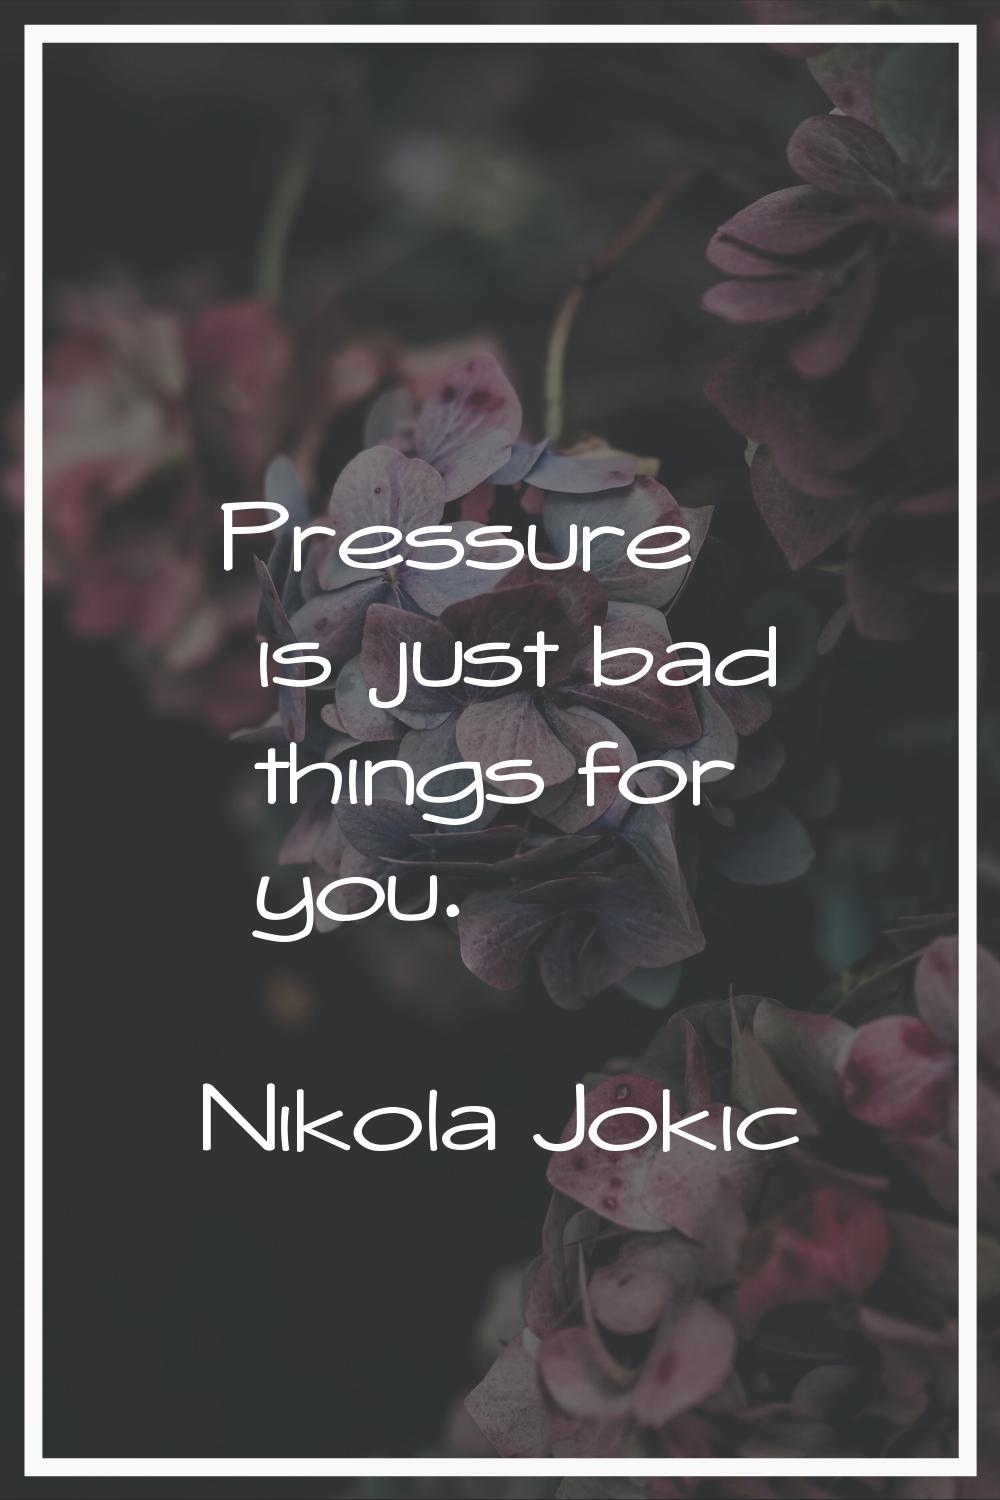 Pressure is just bad things for you.